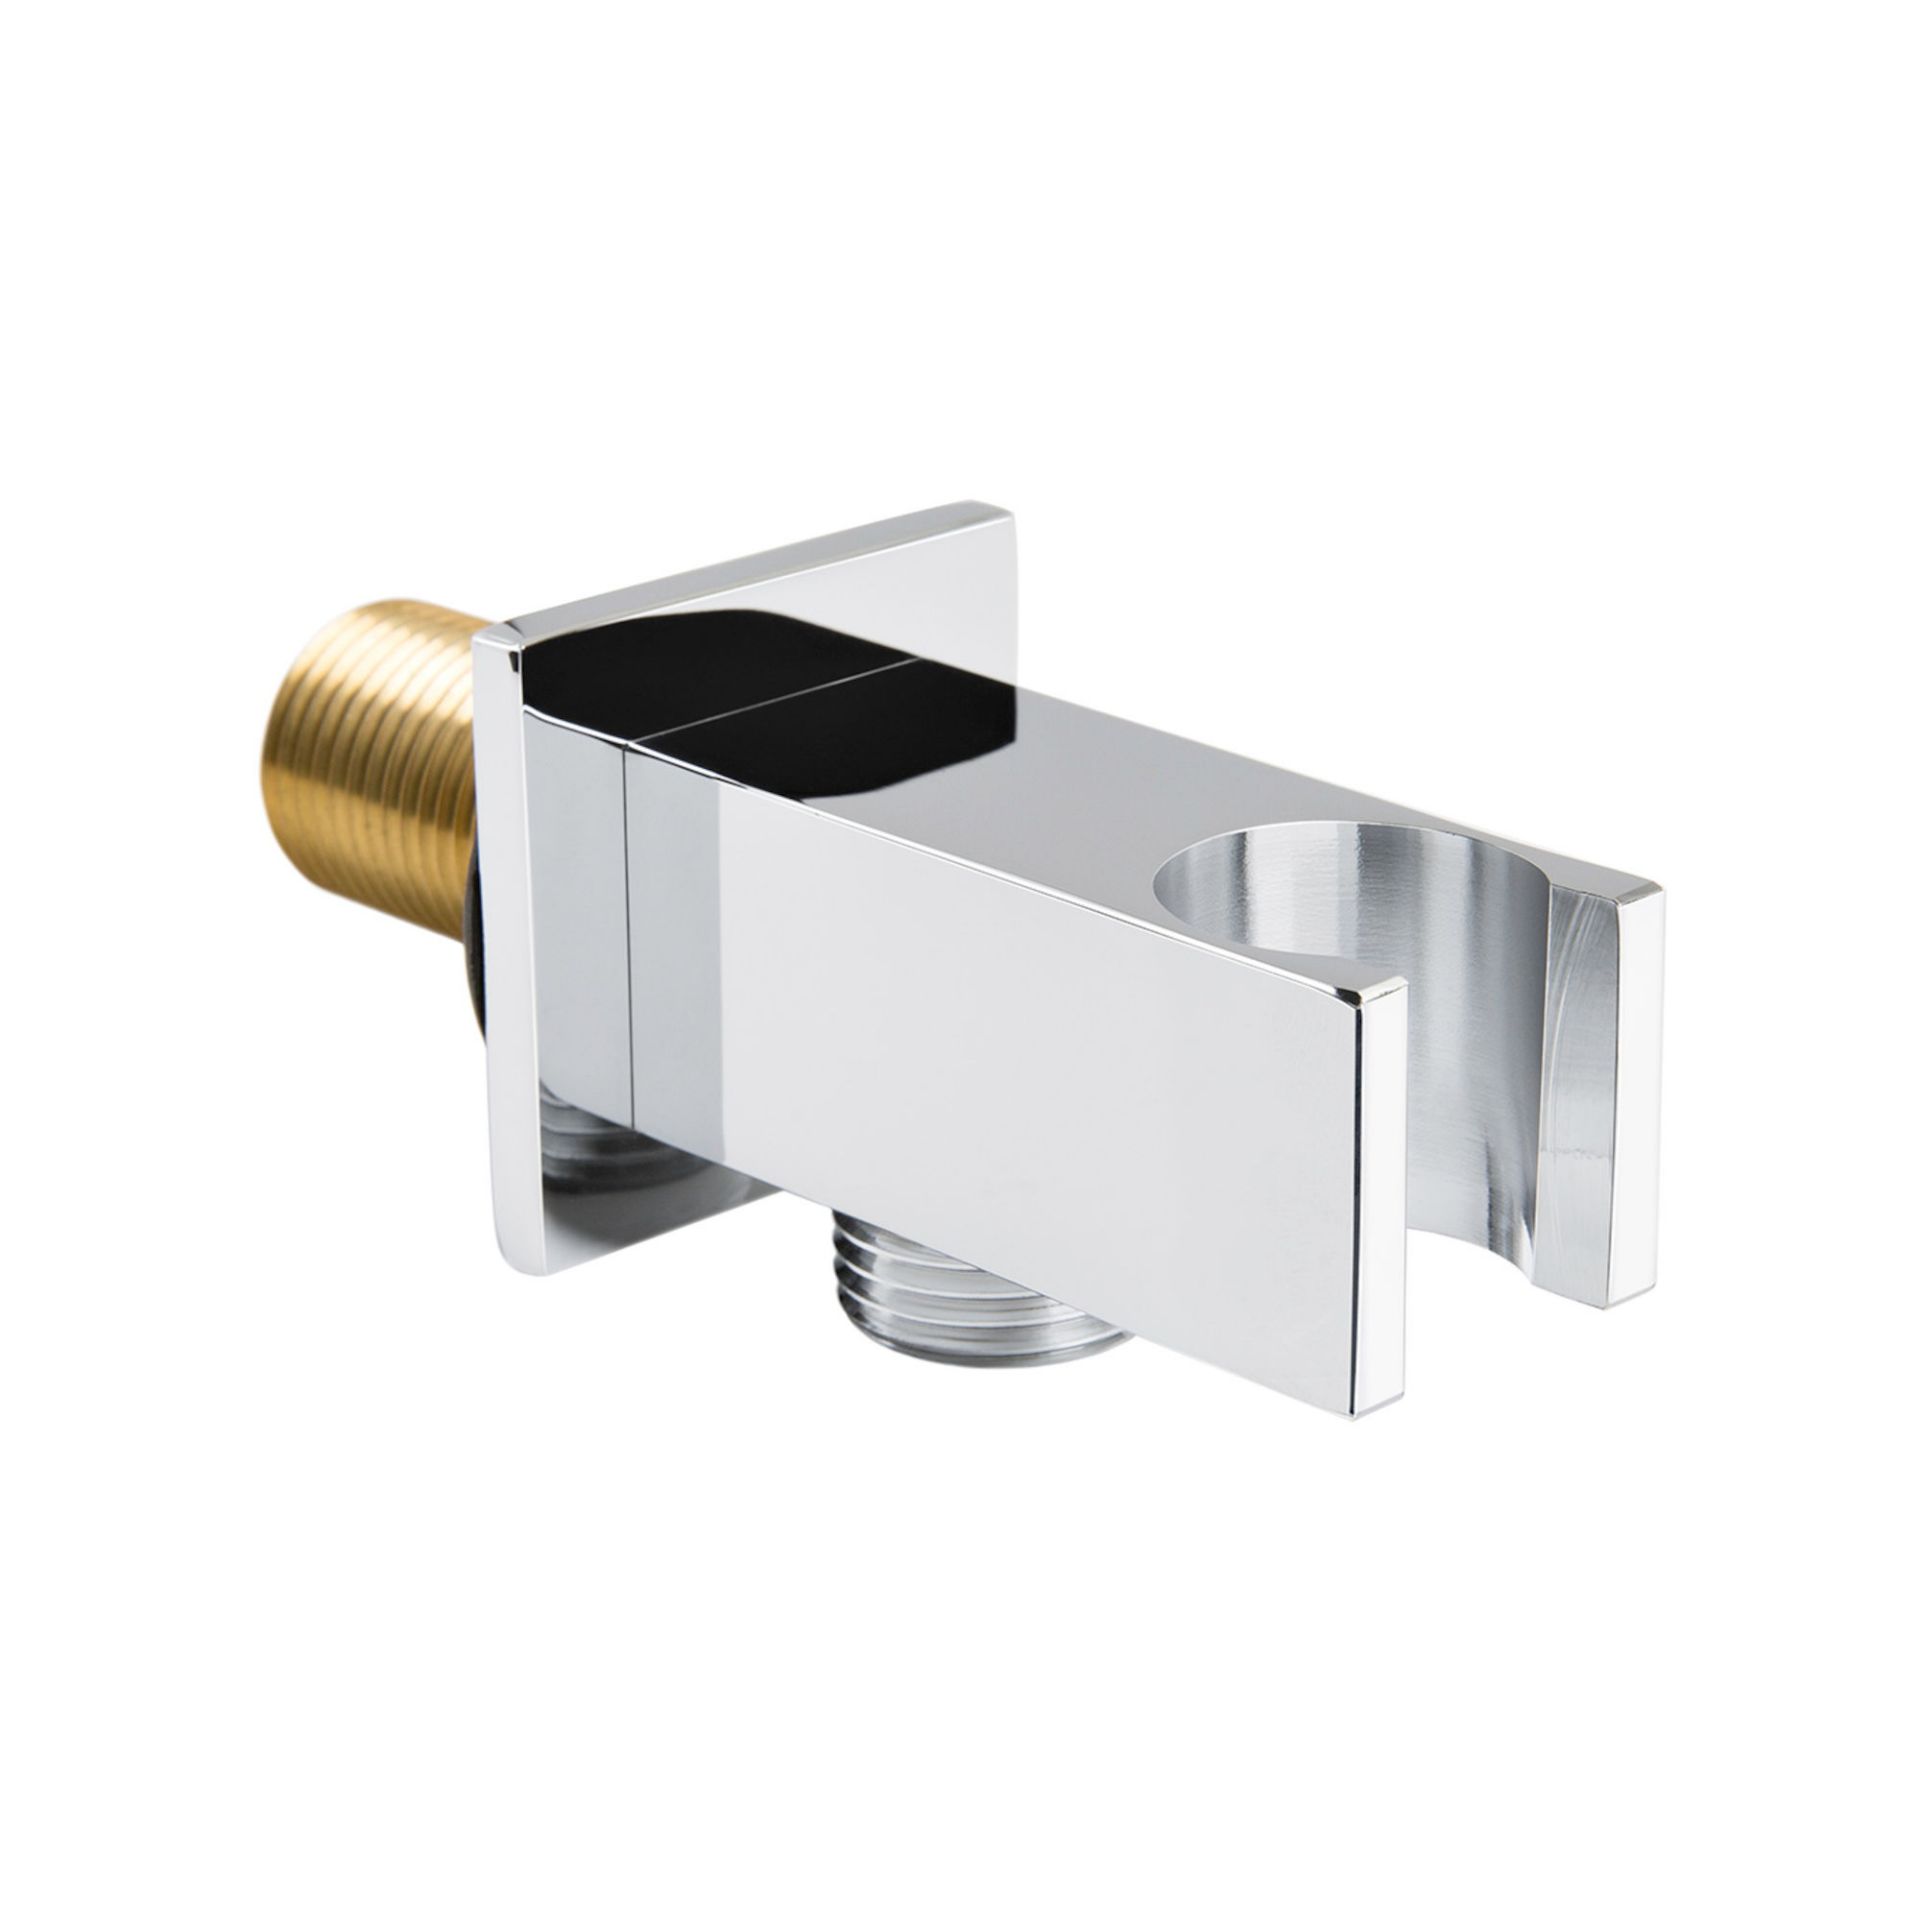 (SU1024) Brass Square Connector With Shower Handset Bracket Chrome Plated Solid Brass Standar...